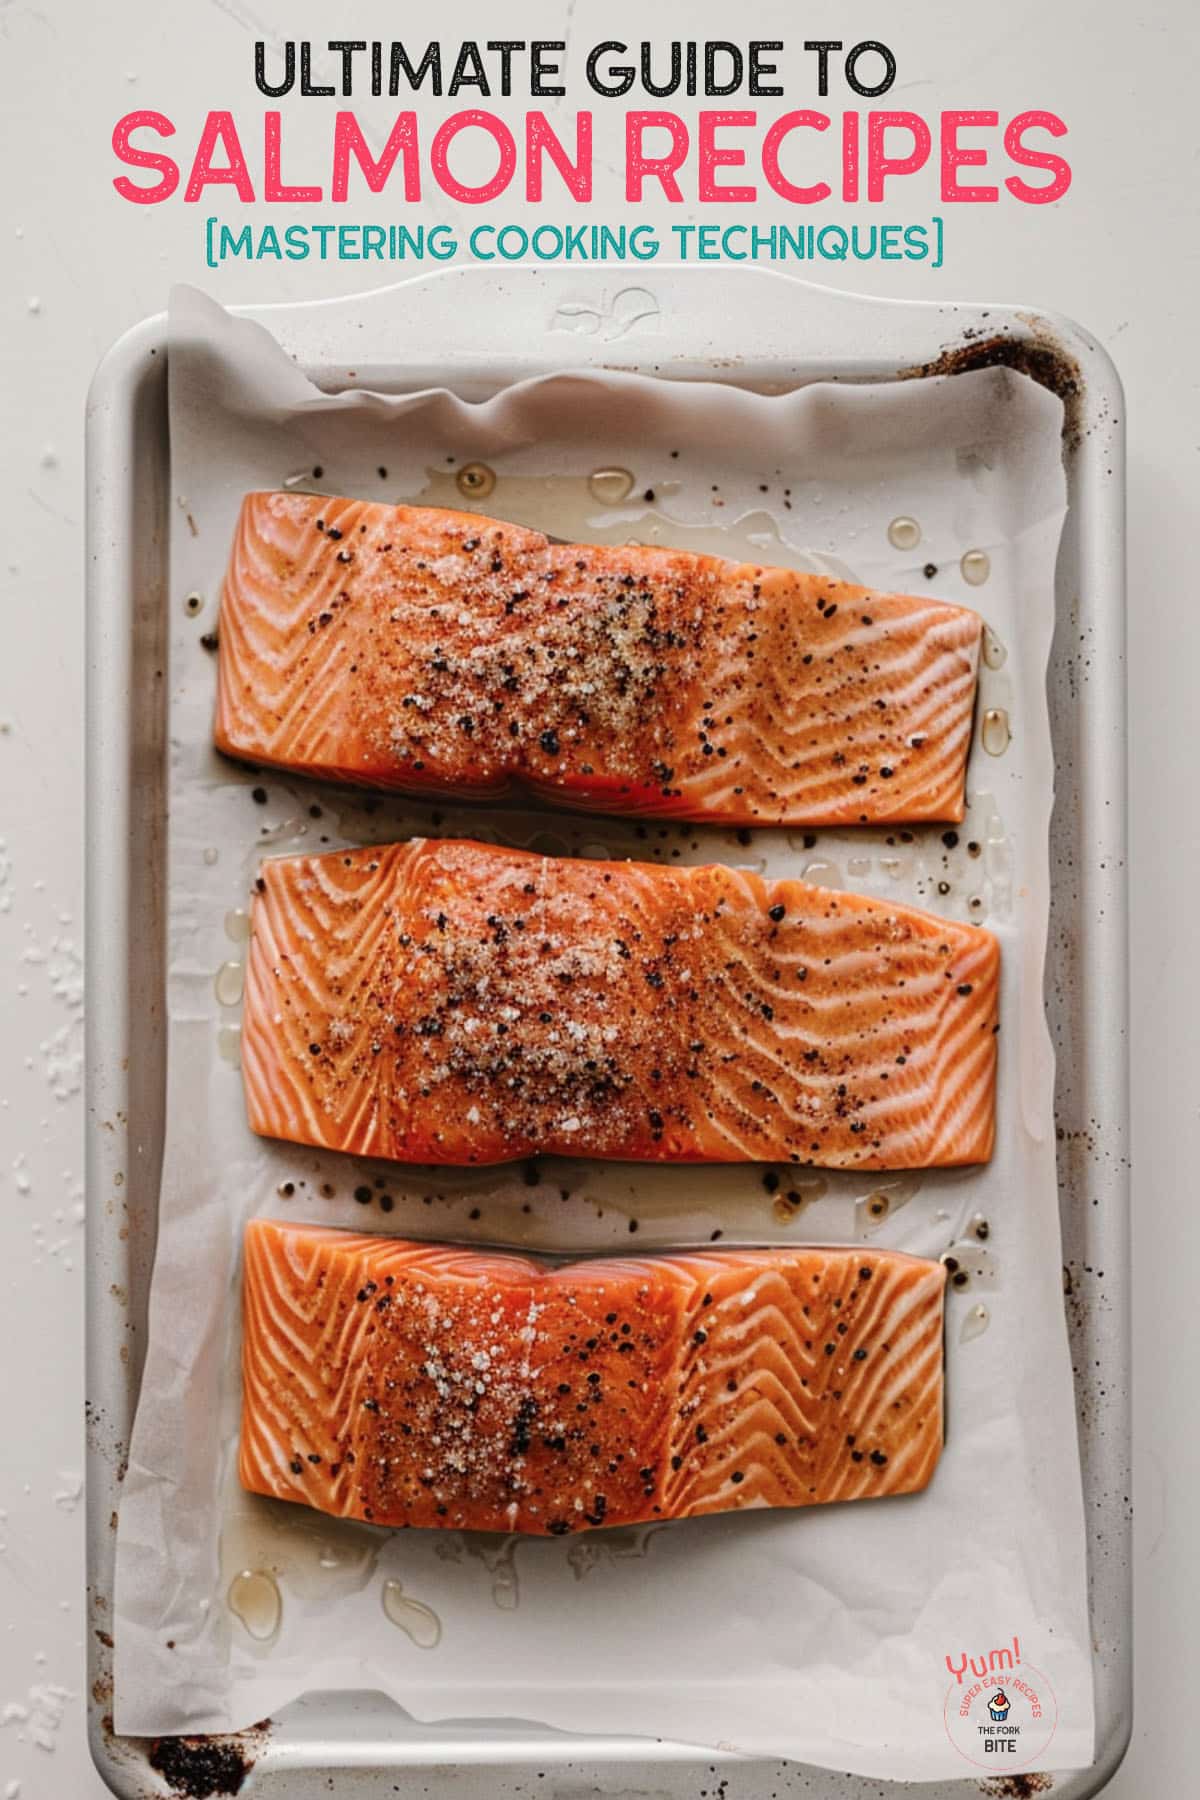 Image for the Ultimate Guide to Salmon Recipes